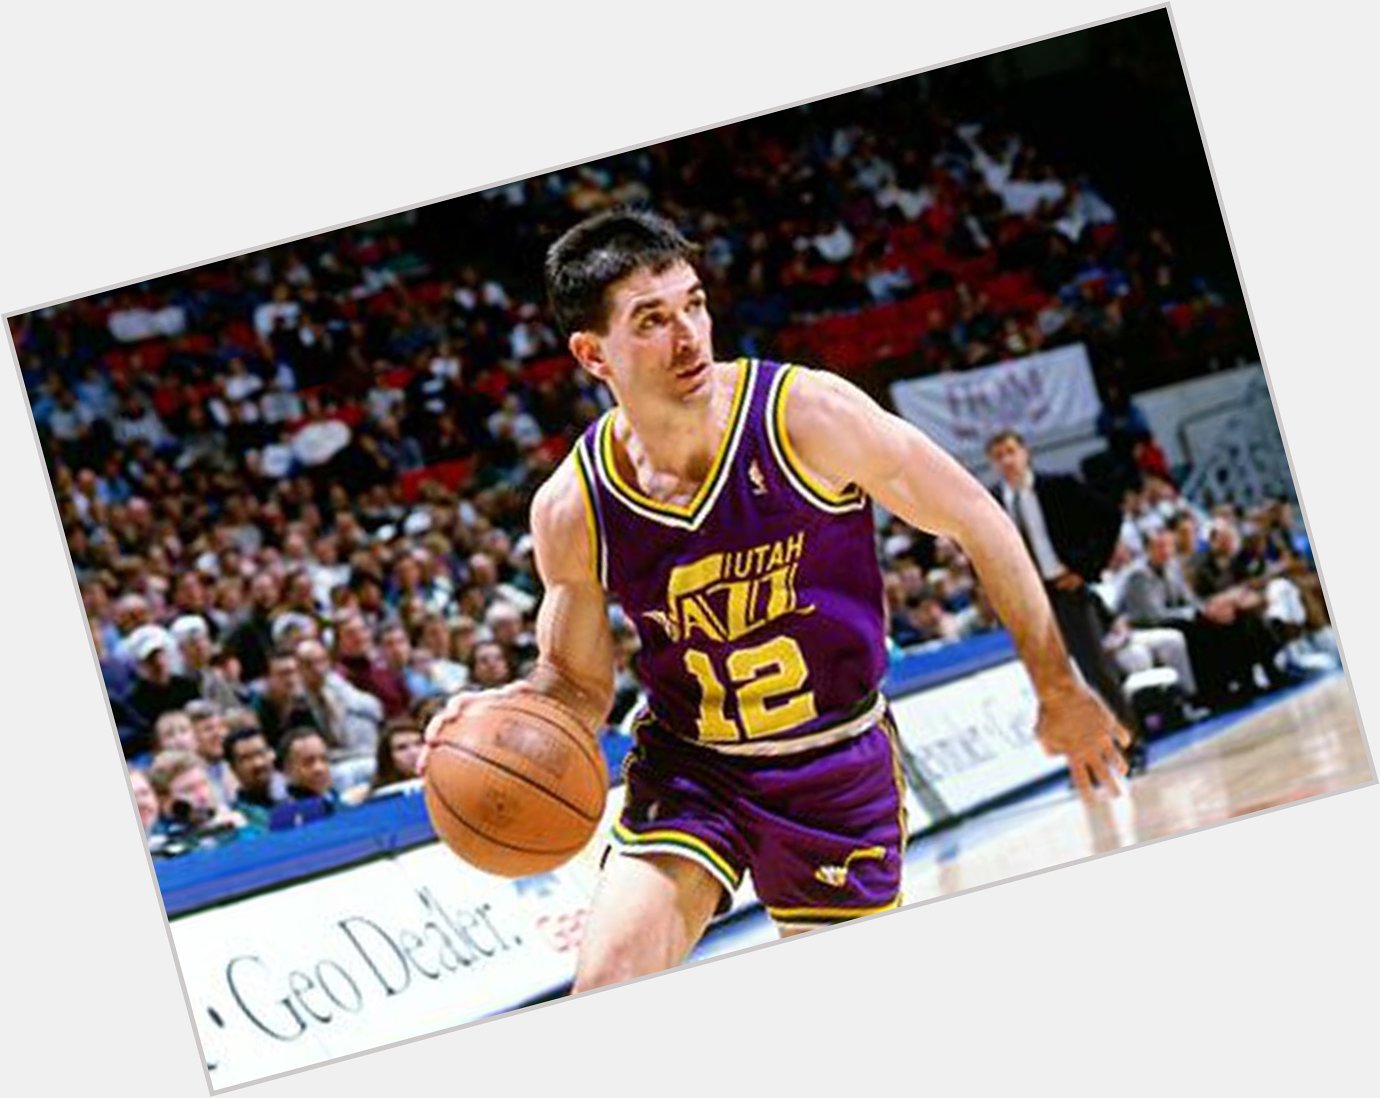 Sports world stand up and wish one of the best to ever do it Happy BDAY John Stockton   